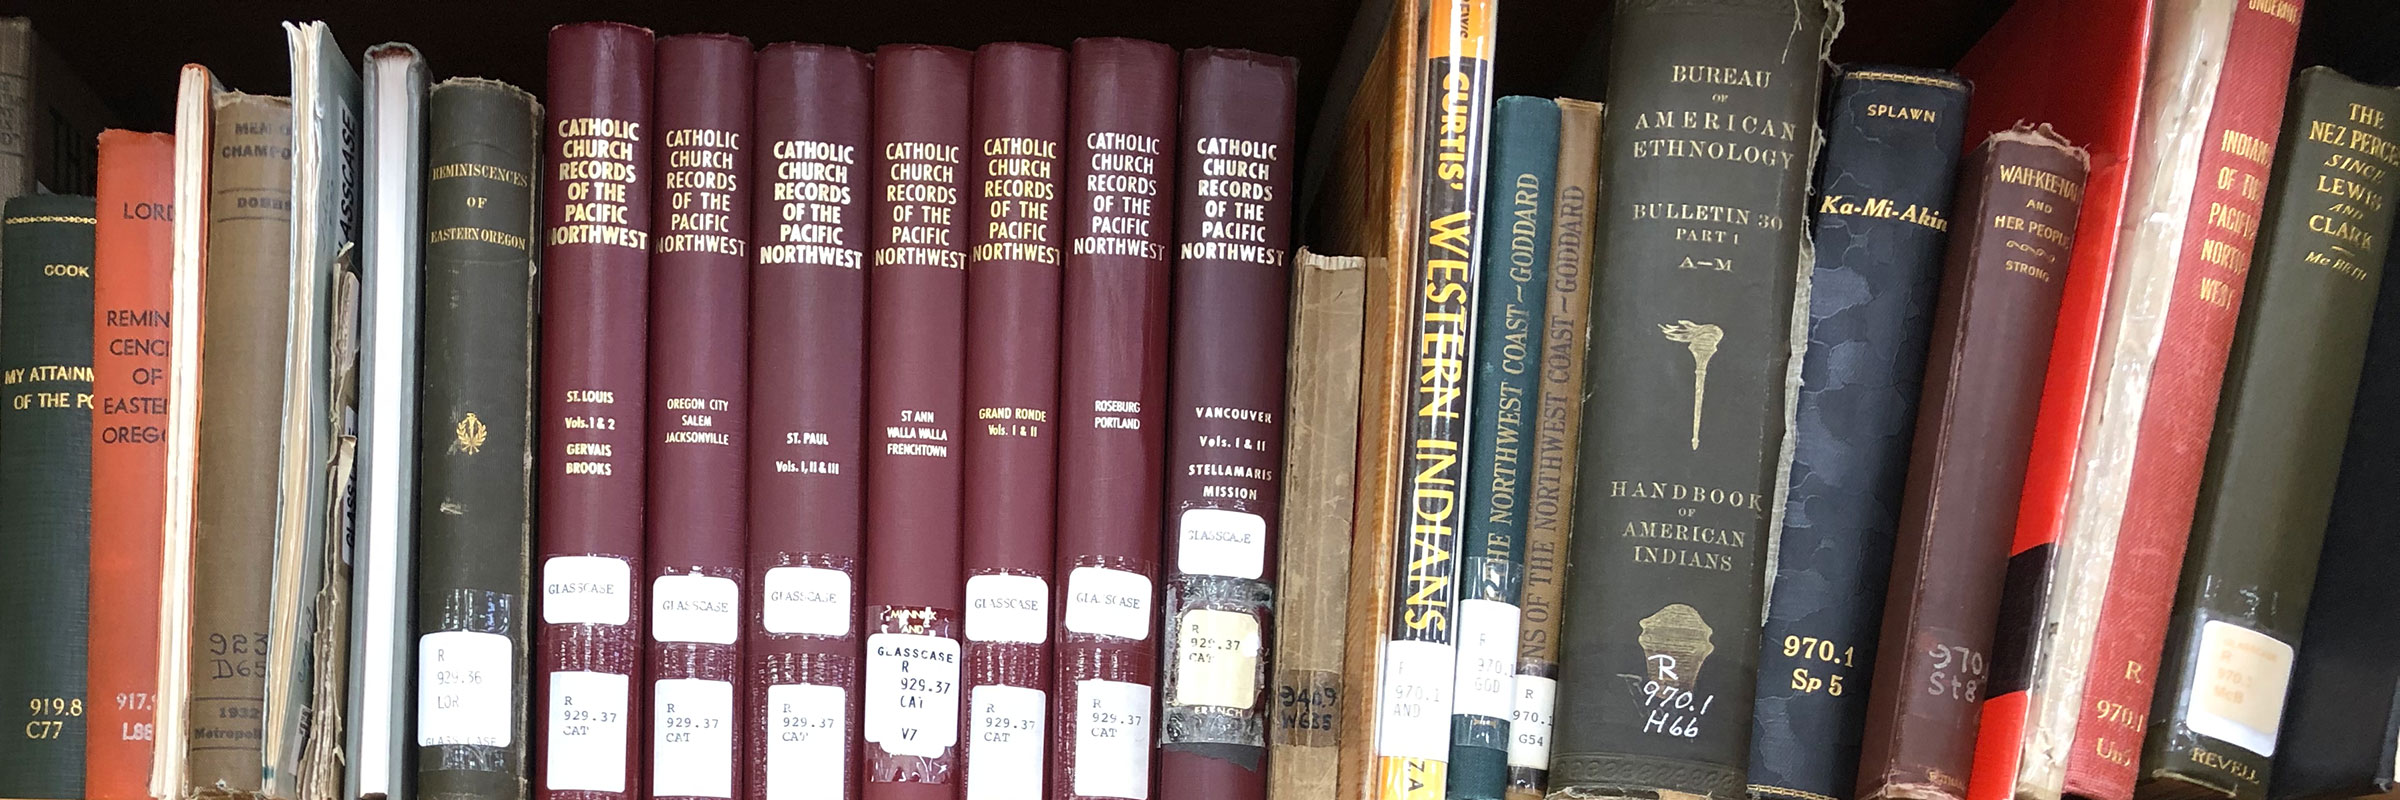 Shelf of books at The Dalles Local History and Genealogy section